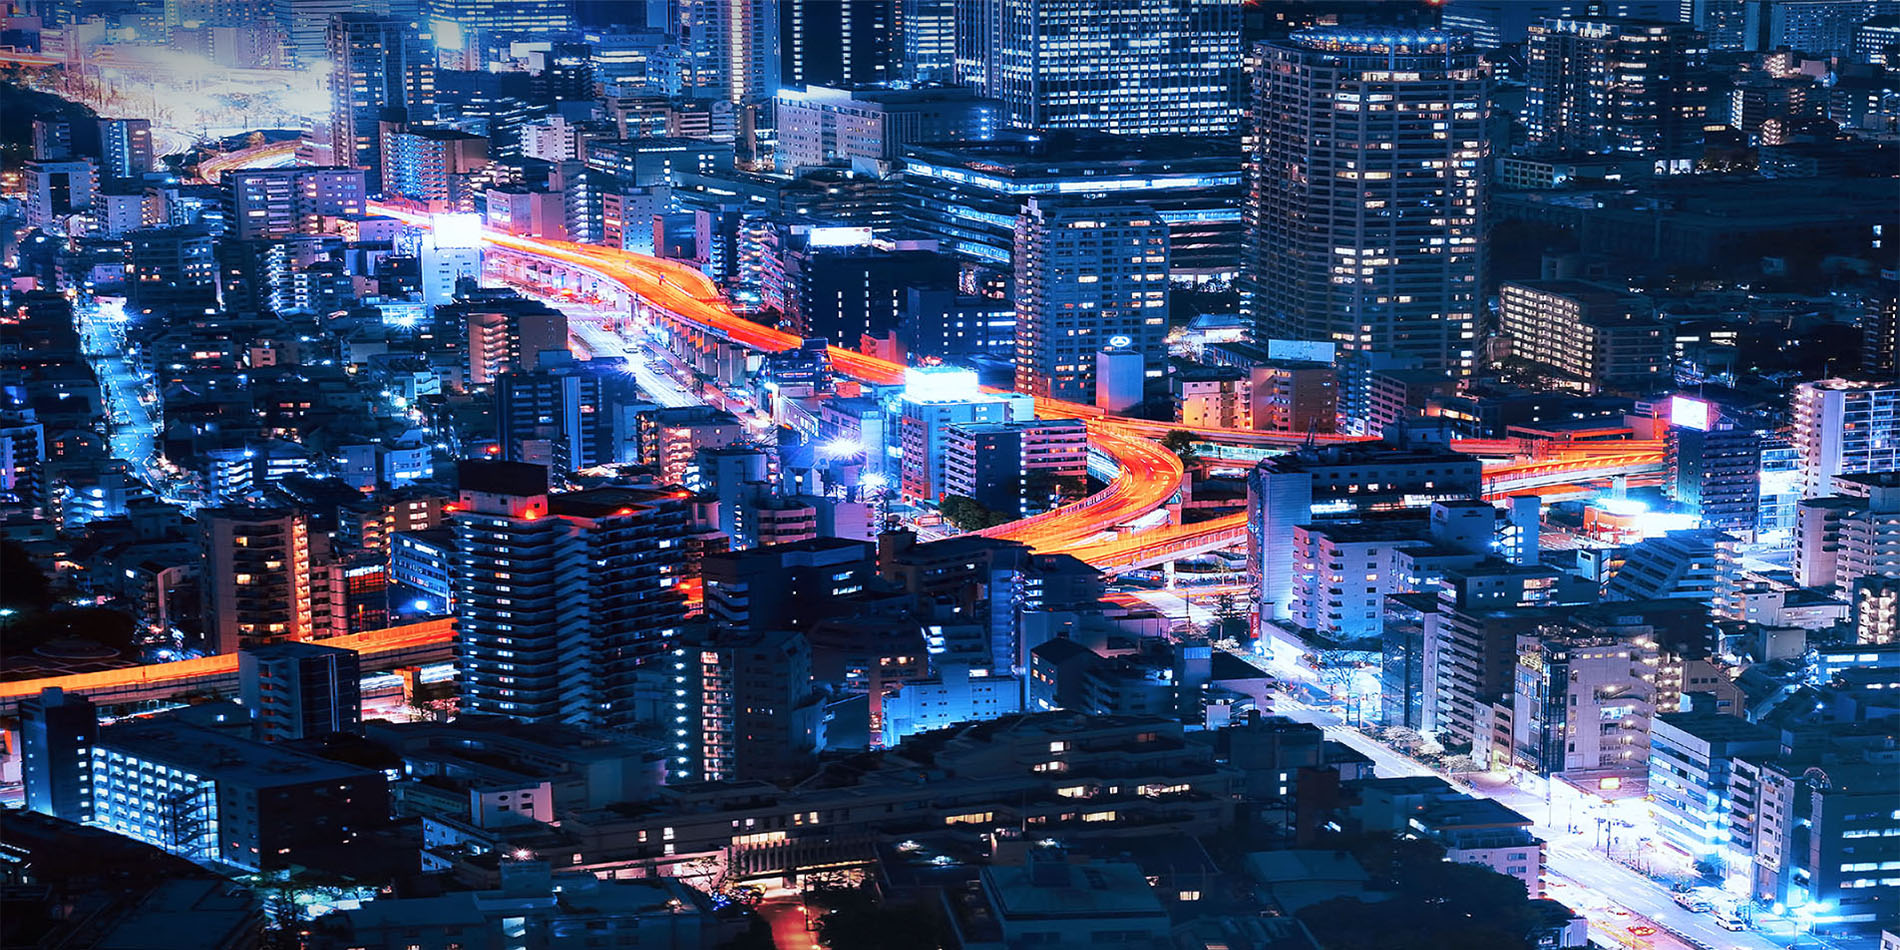 Light streaks over Tokyo's busy streets at night